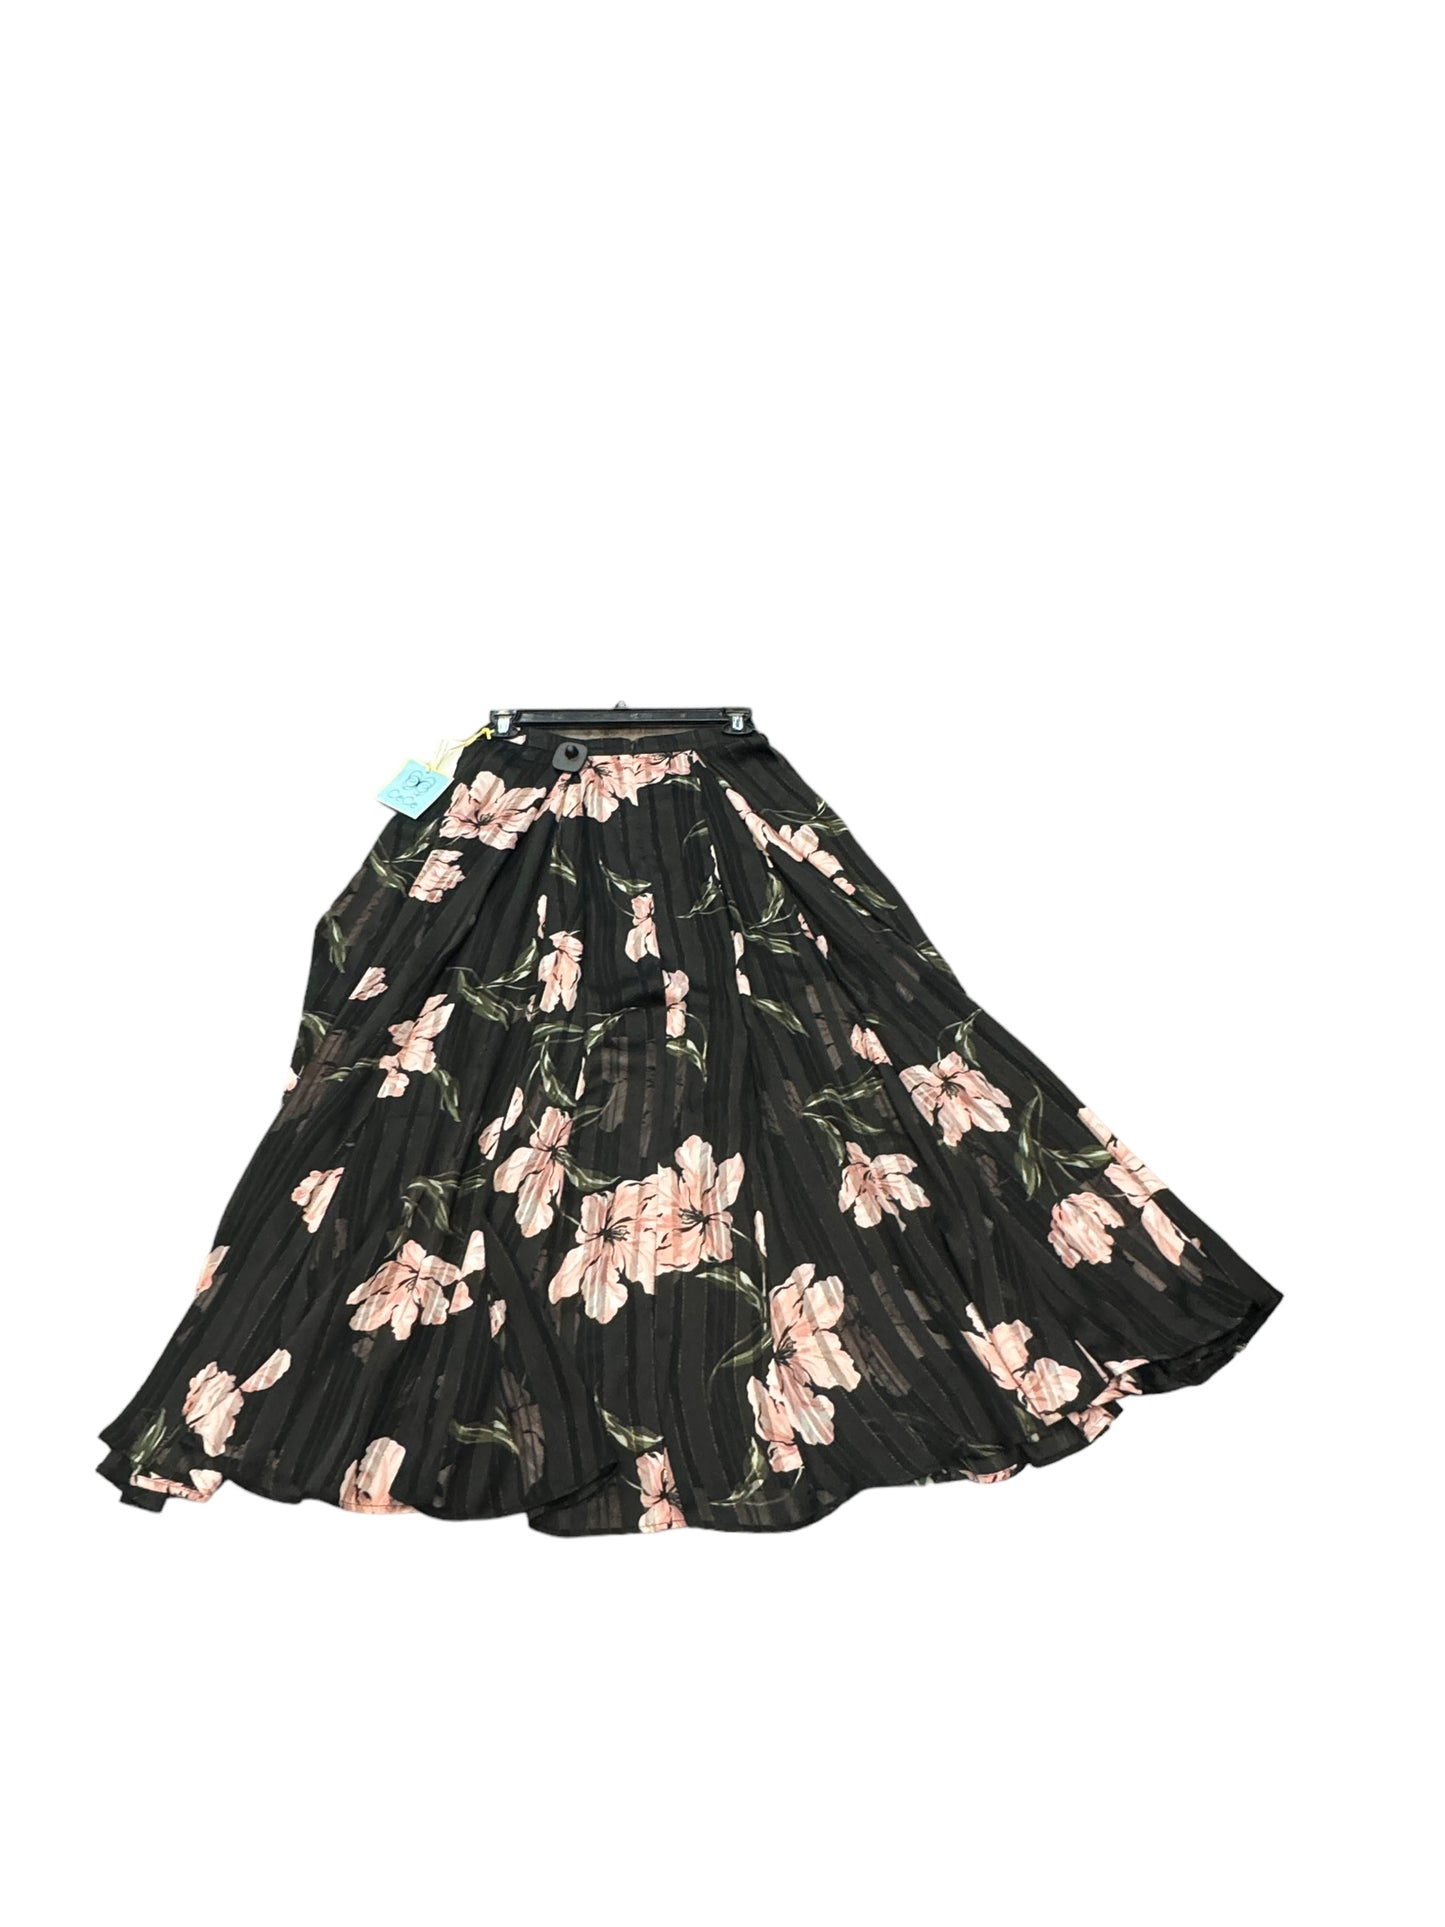 Skirt Maxi By Cece  Size: 4